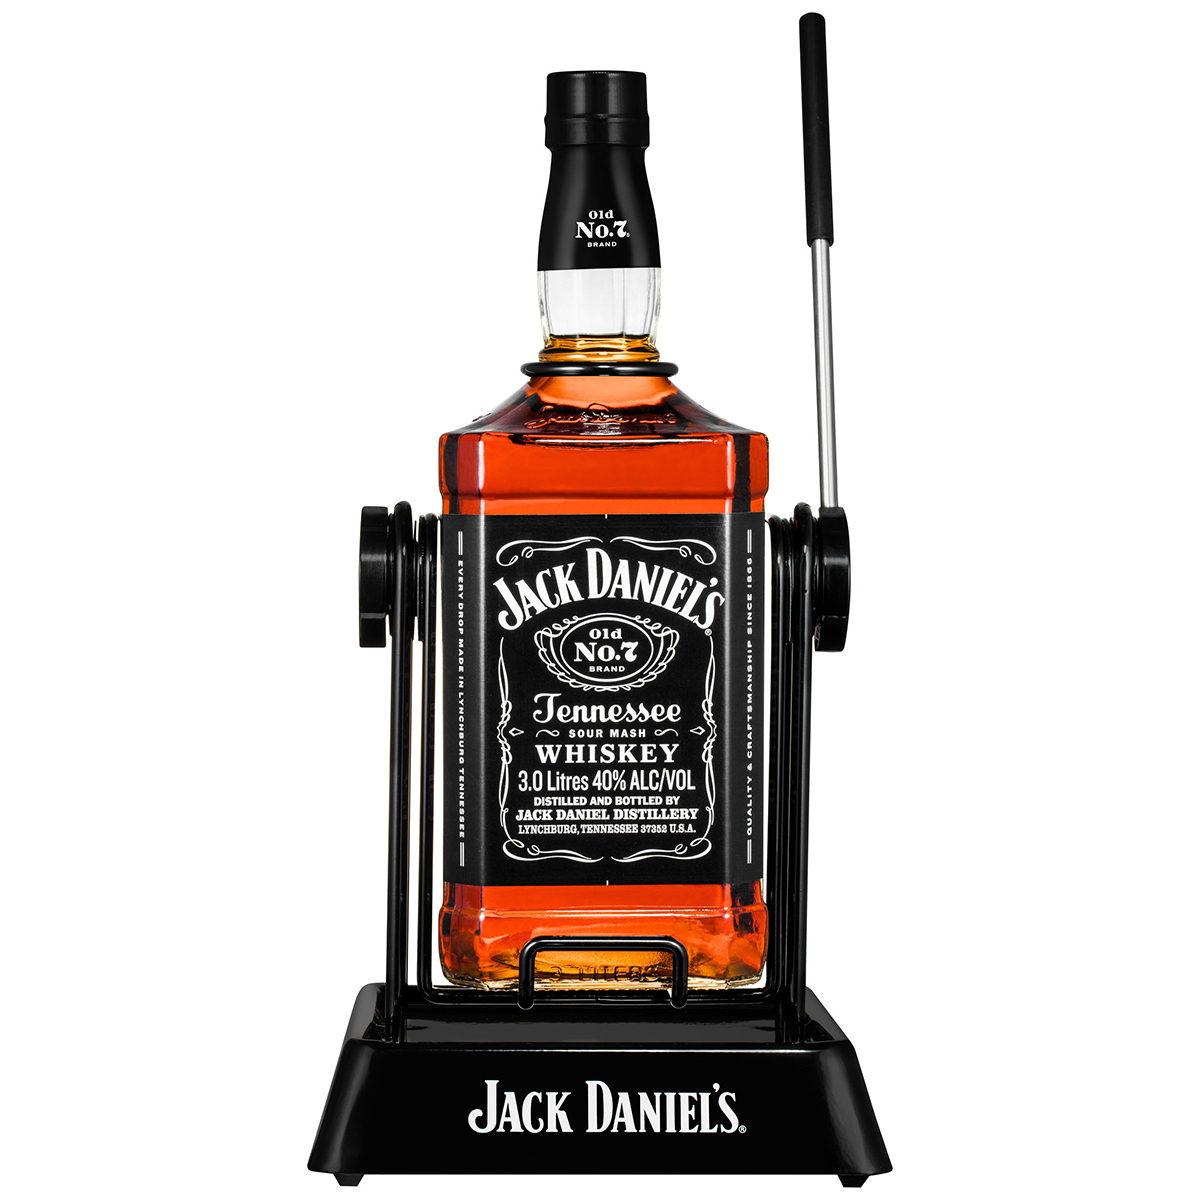 Jack Daniel's Old No.7 Tennessee Whiskey Cradle 3L